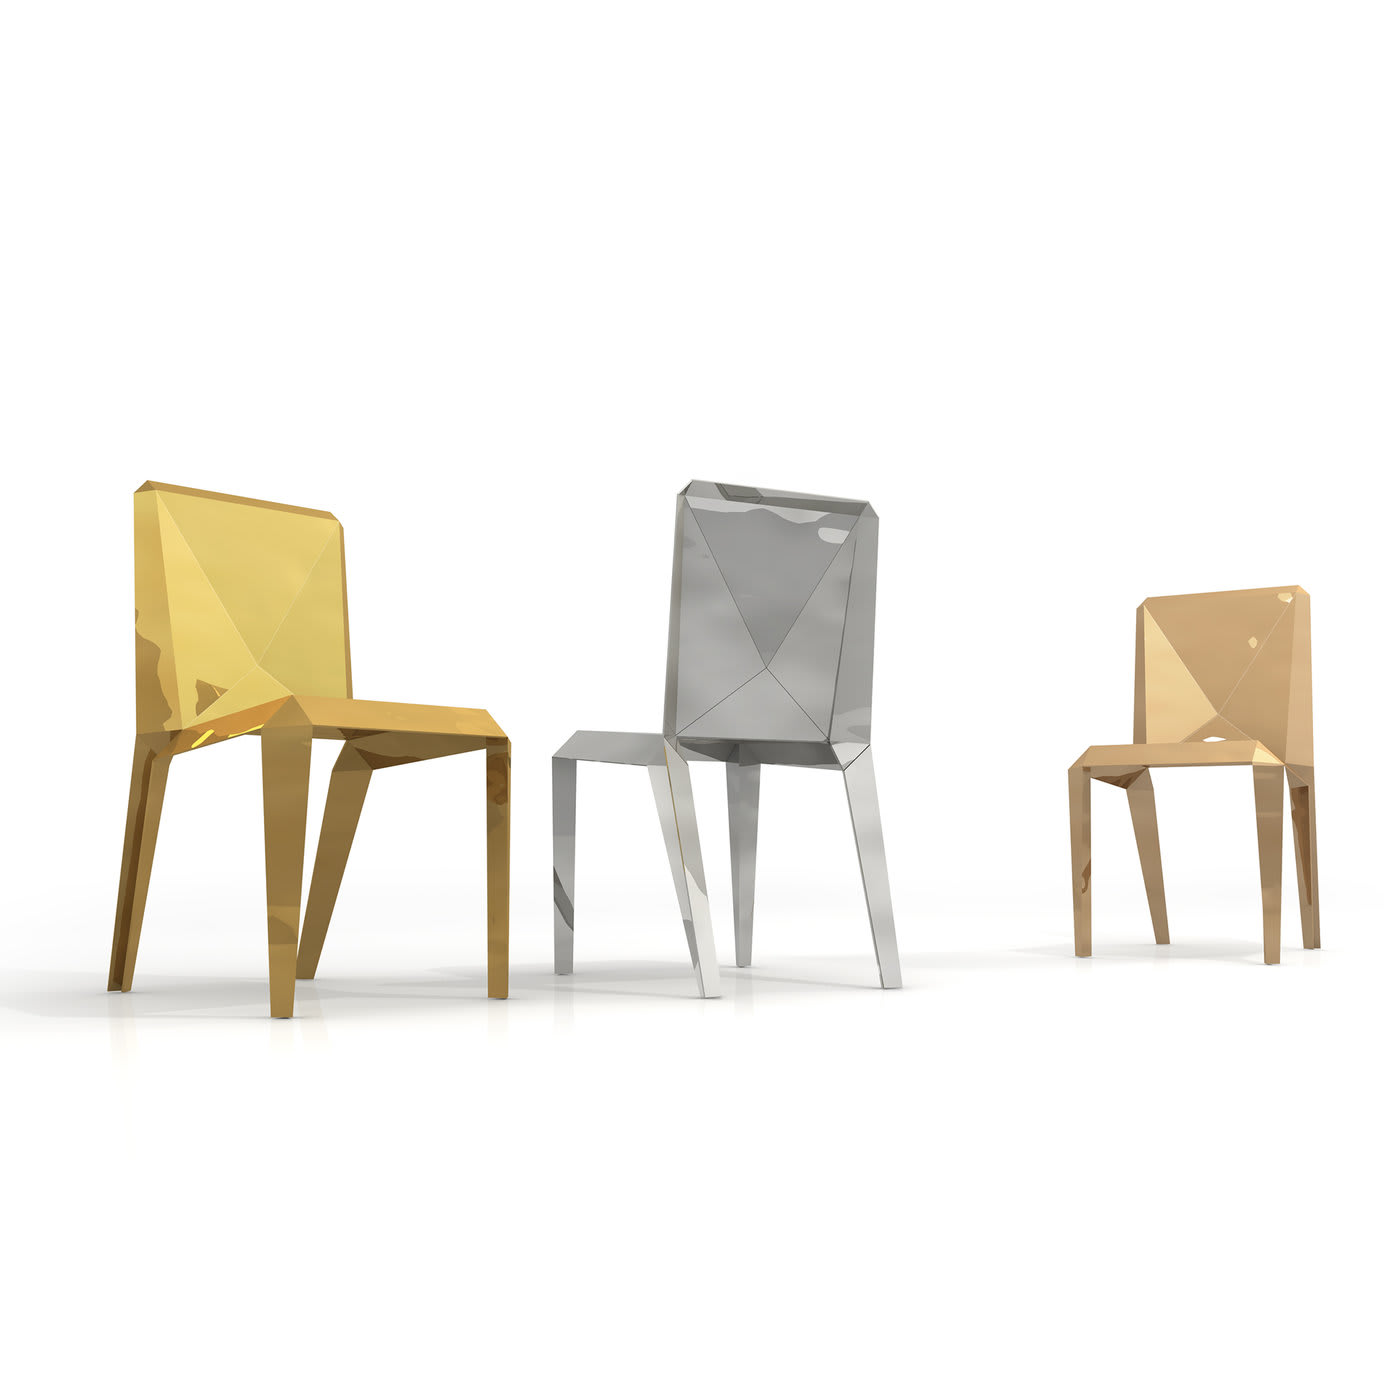 Lingotto Gold Chair by Garilab by Piter Perbellini - Altreforme